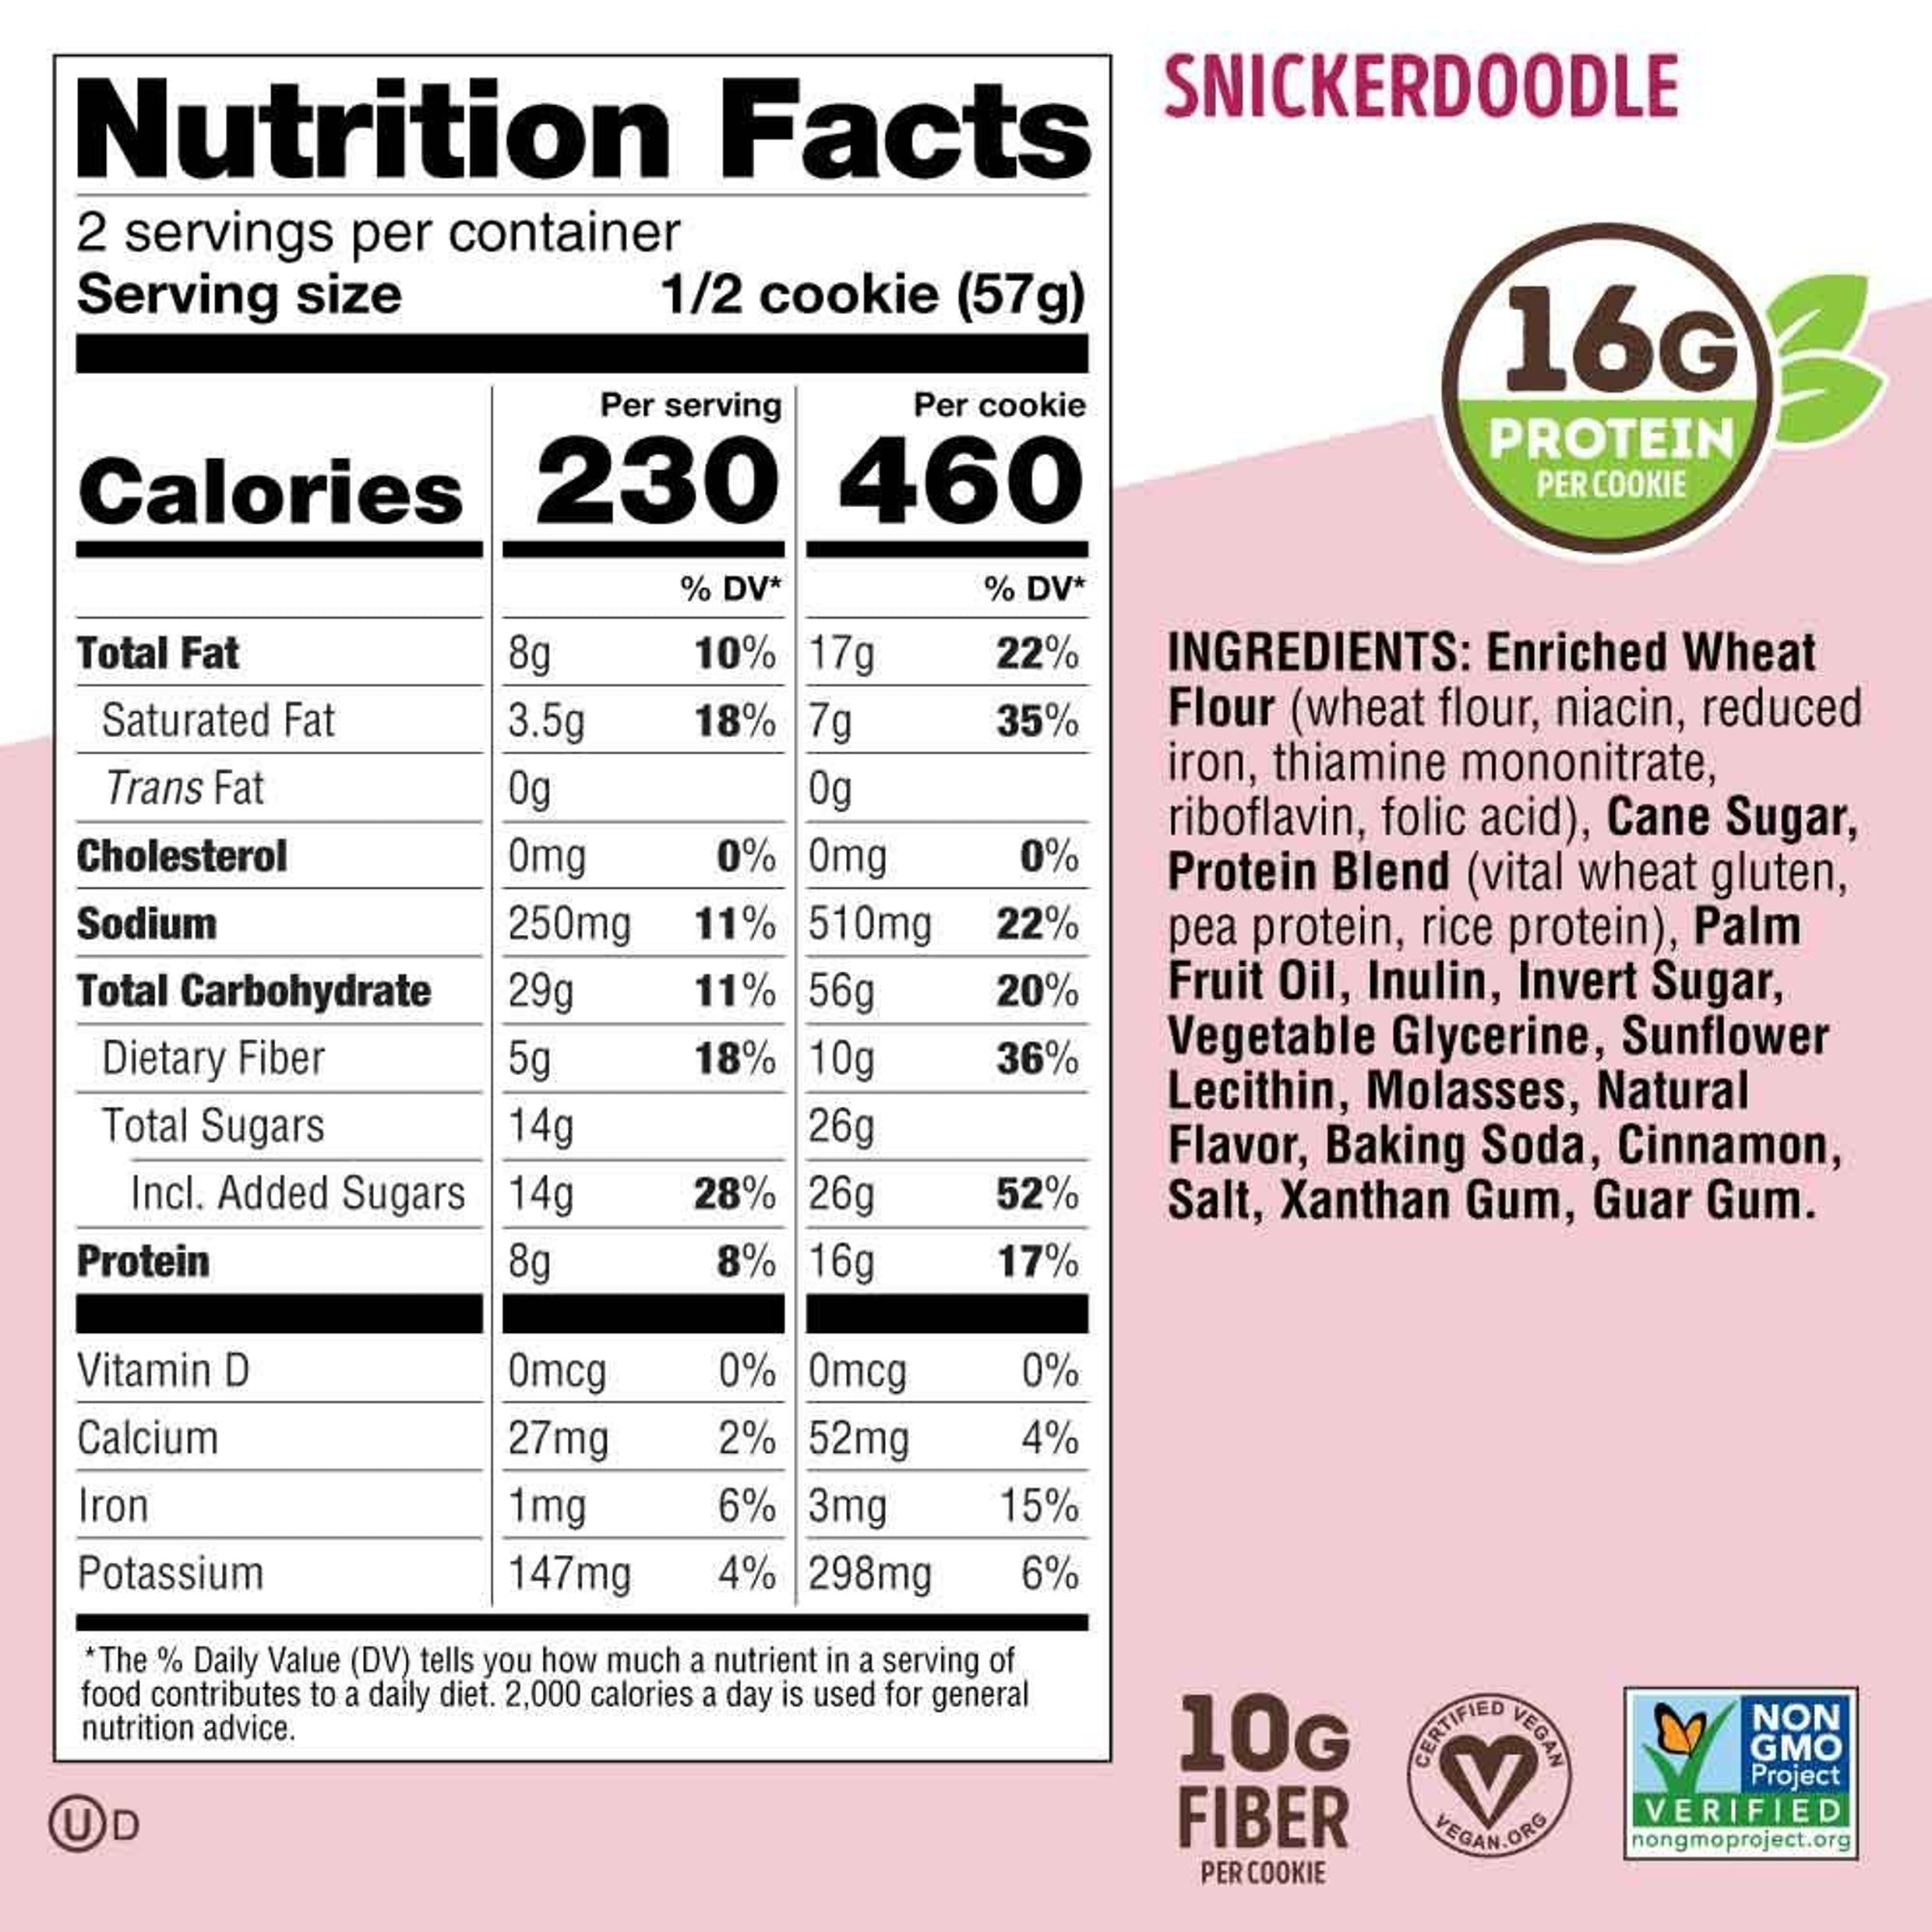 Snickerdoodle nutrition facts: 2 servings each with 230 calories, 8g total fat, 29g carbs, 5g fiber, 14g sugar, 250mg sodium. Contains wheat, sugar, oils, and spices.